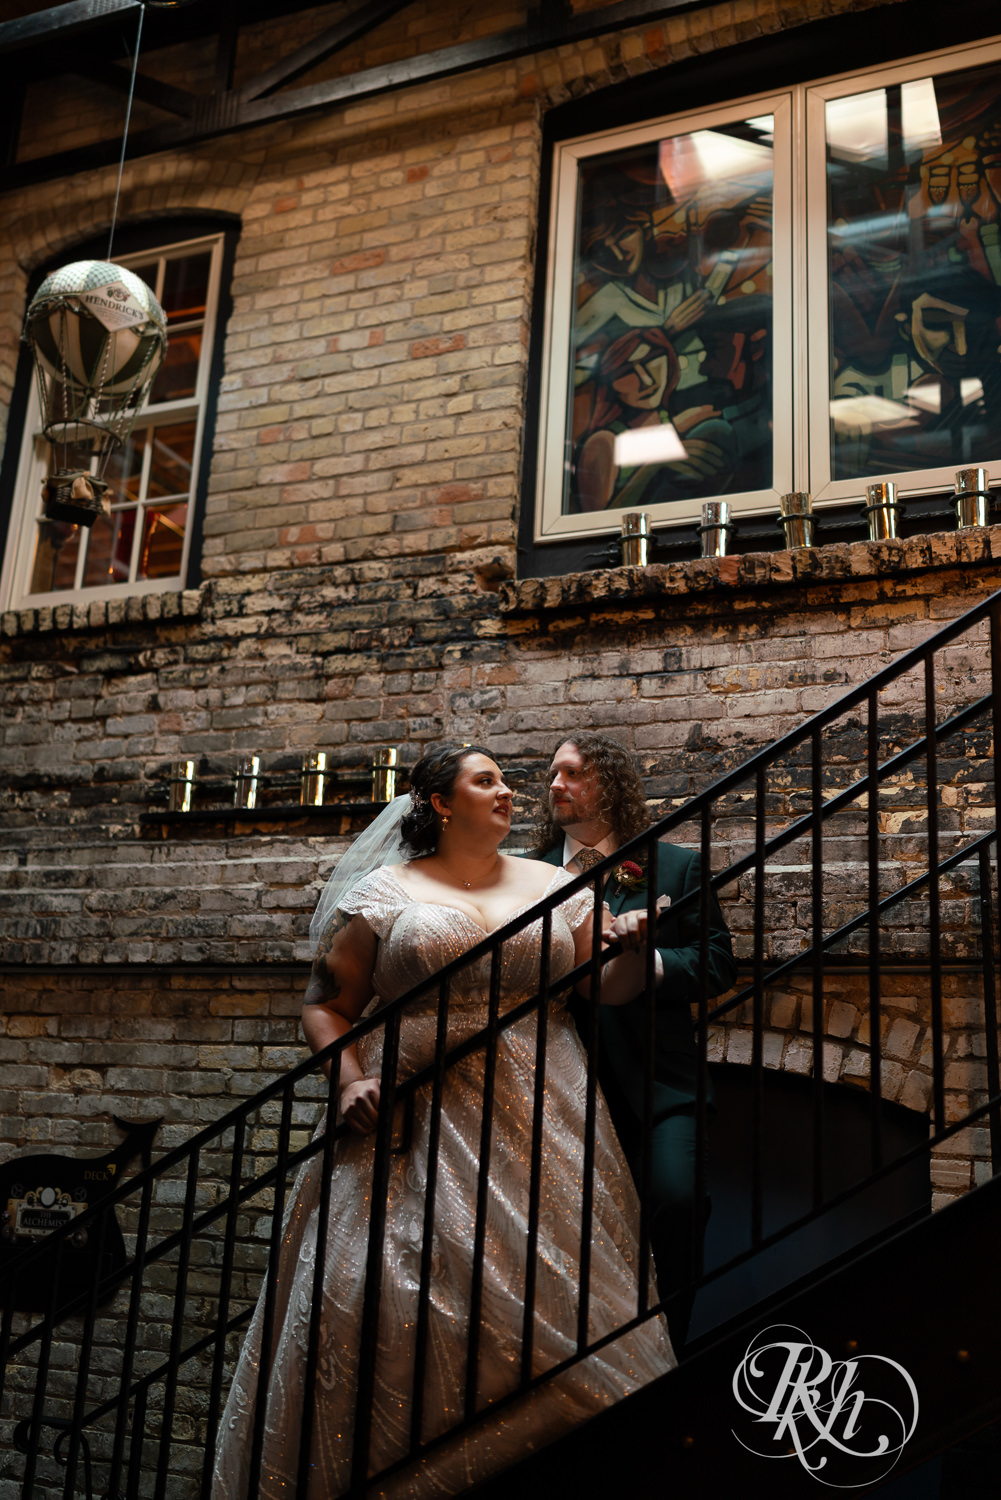 Bride and groom smile on stairs at Kellerman's Event Center in White Bear Lake, Minnesota.